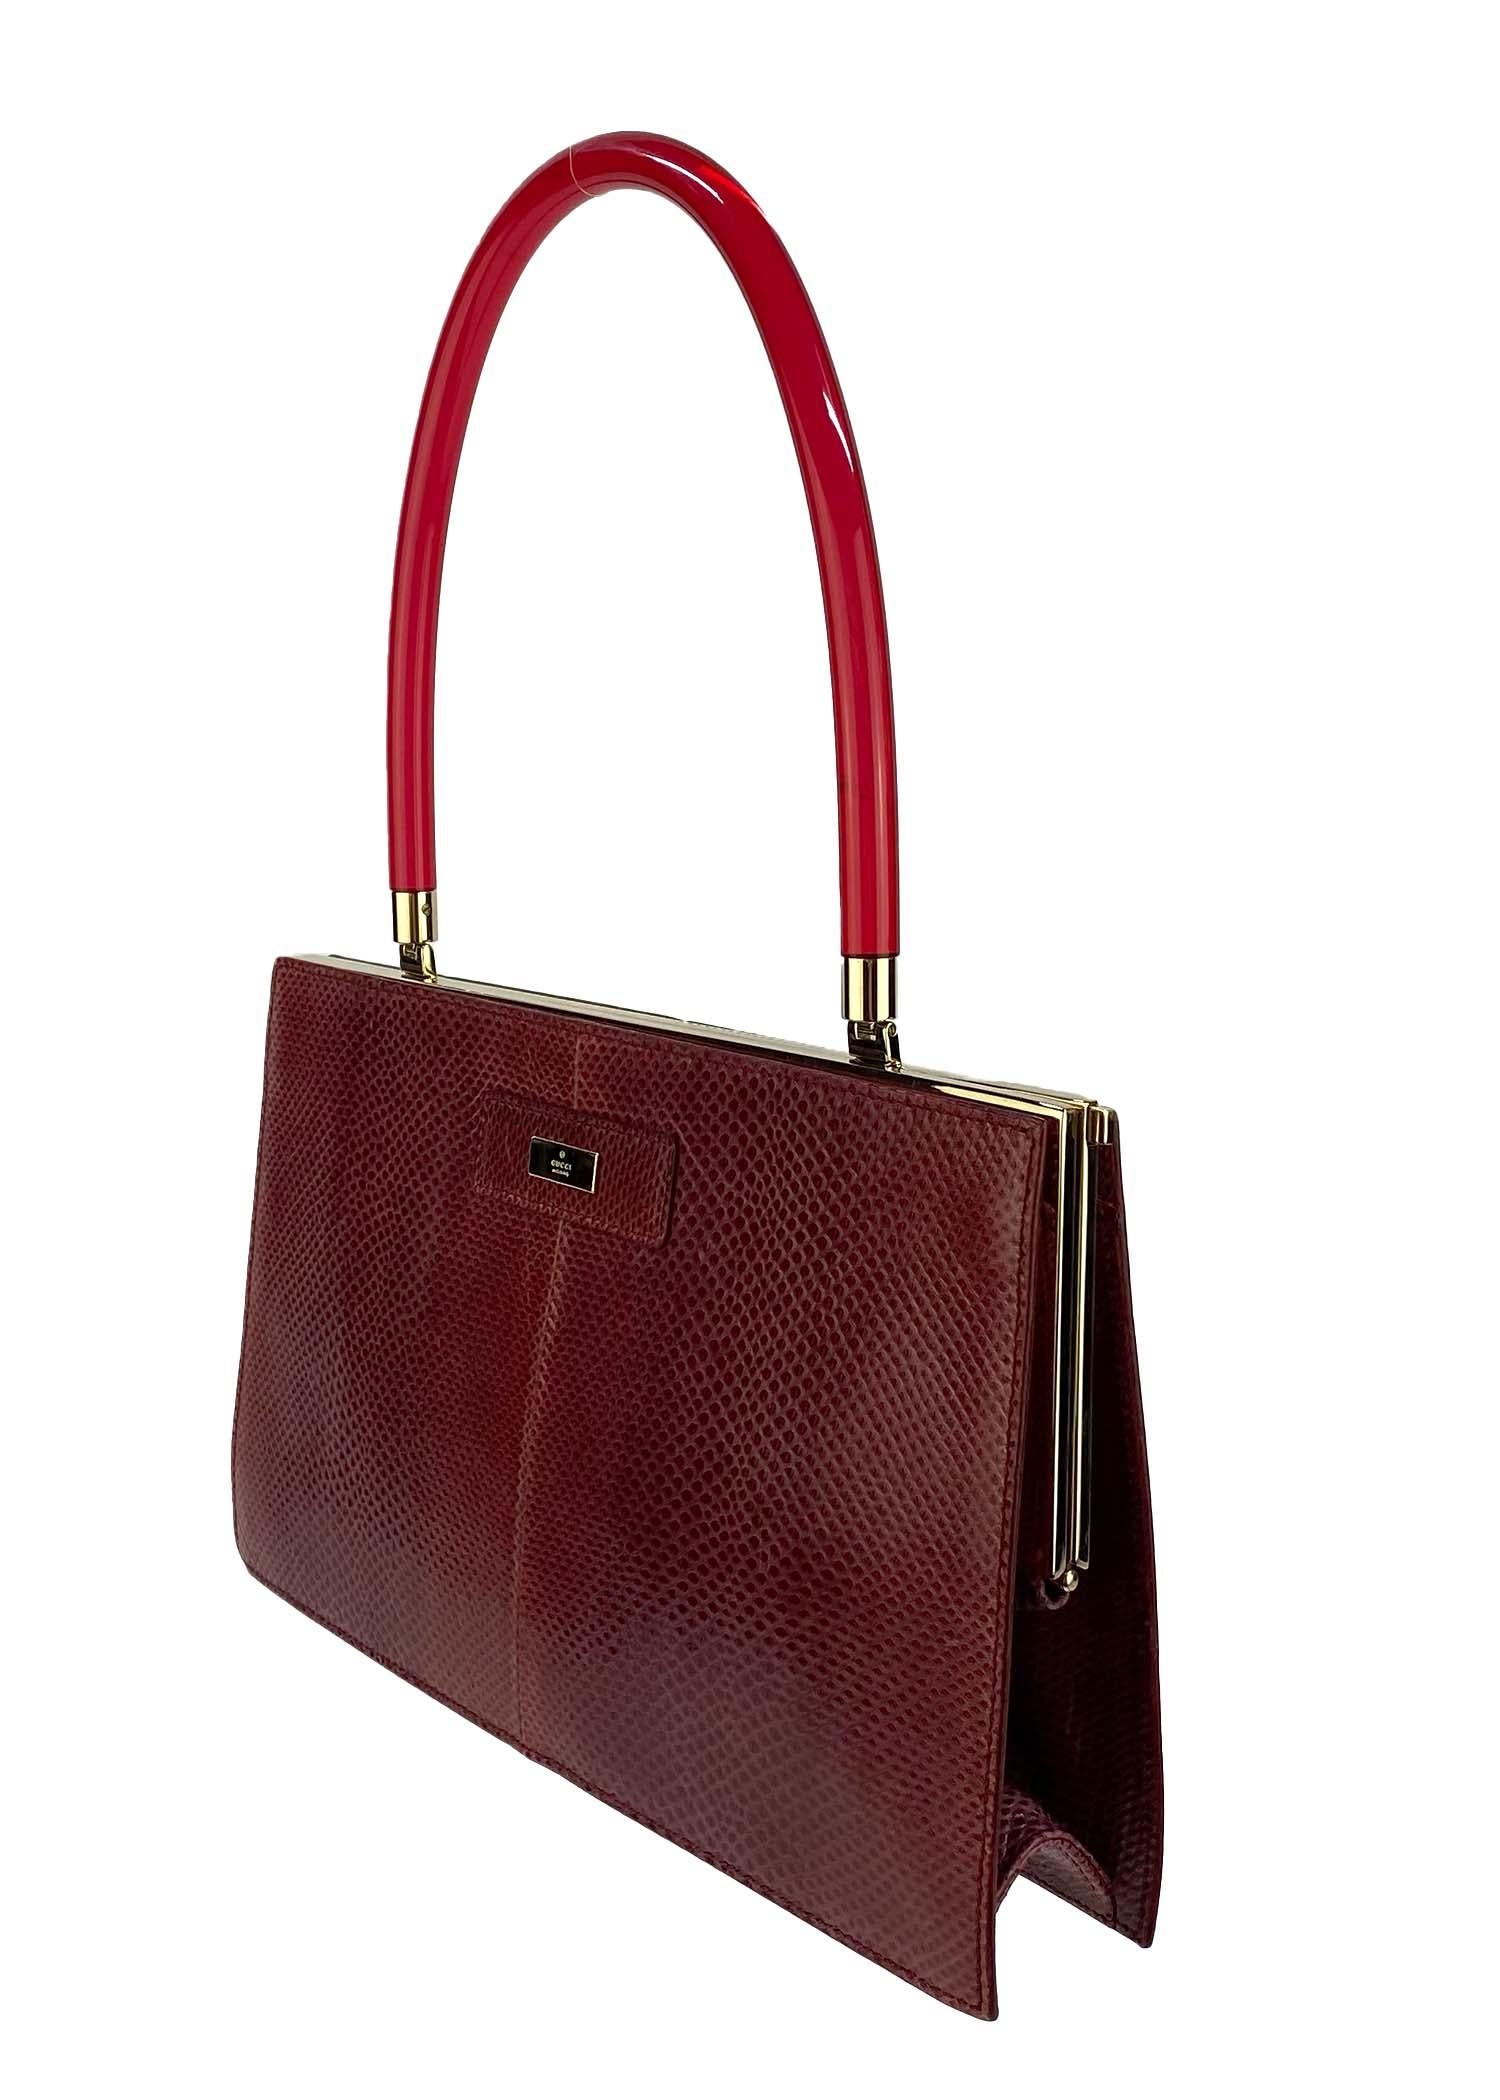 Presenting a rare deep red lizard skin Gucci bag, designed by Tom Ford. This beautiful bag is constructed primarily of red dyed Karung snake skin and is made complete with gold-colored accents and a clear red lucite handle. This bag, from the